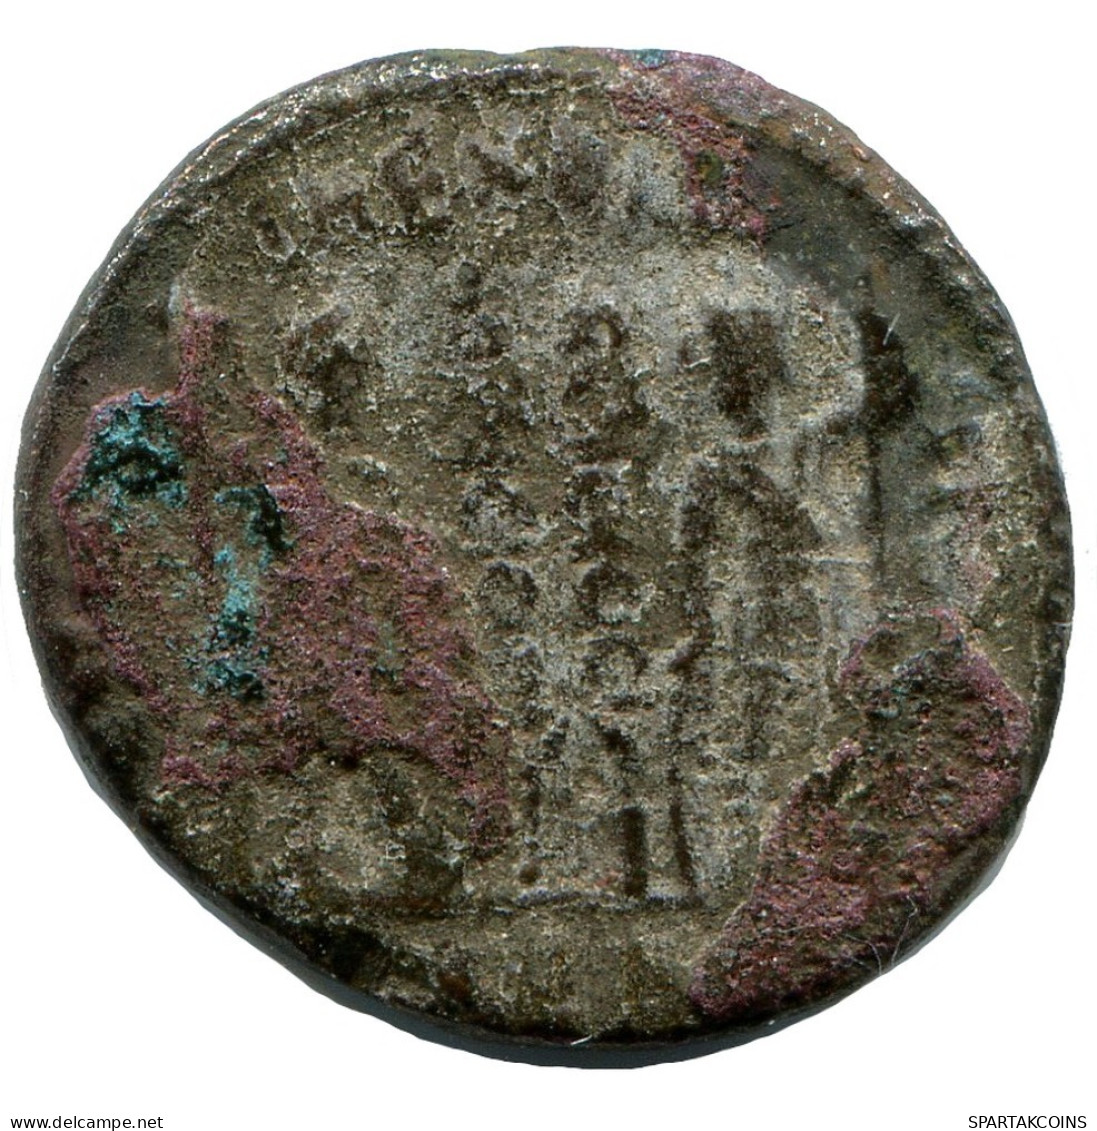 CONSTANTIUS II ALEKSANDRIA FROM THE ROYAL ONTARIO MUSEUM #ANC10478.14.U.A - The Christian Empire (307 AD To 363 AD)